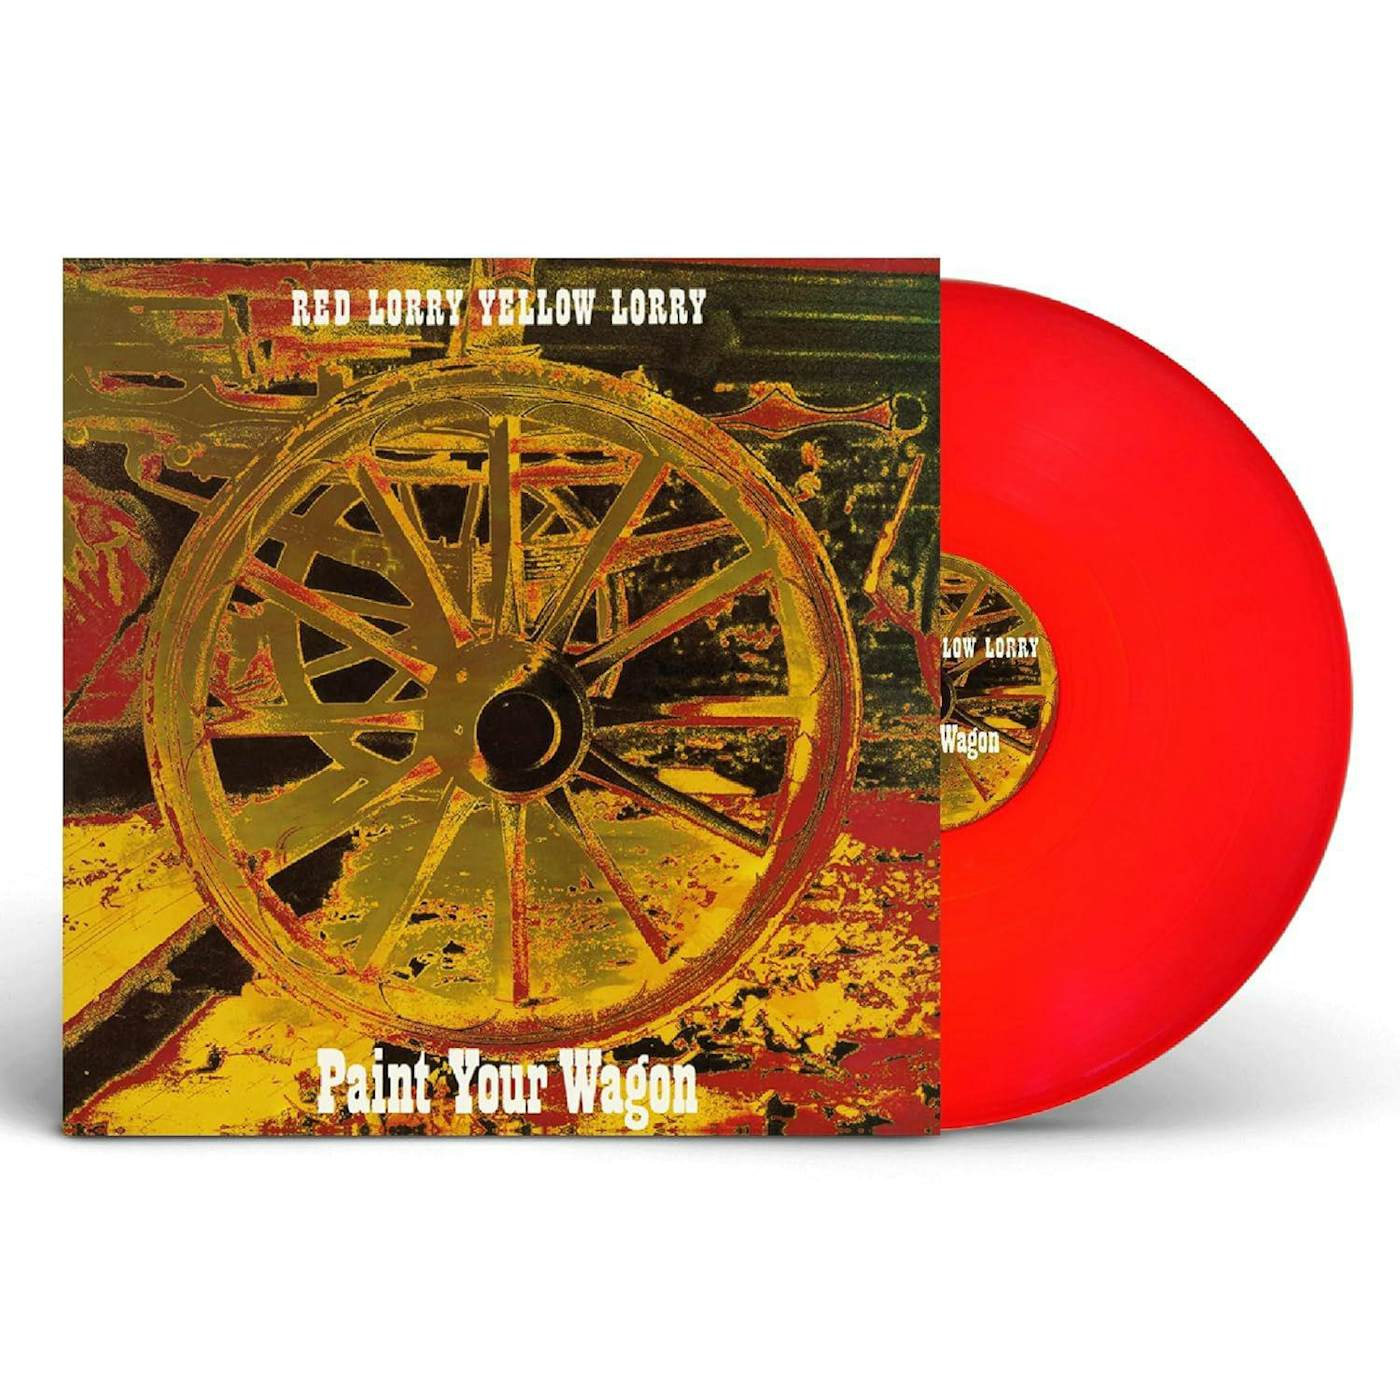 Red Lorry Yellow Lorry Paint Your Wagon (Red) Vinyl Record